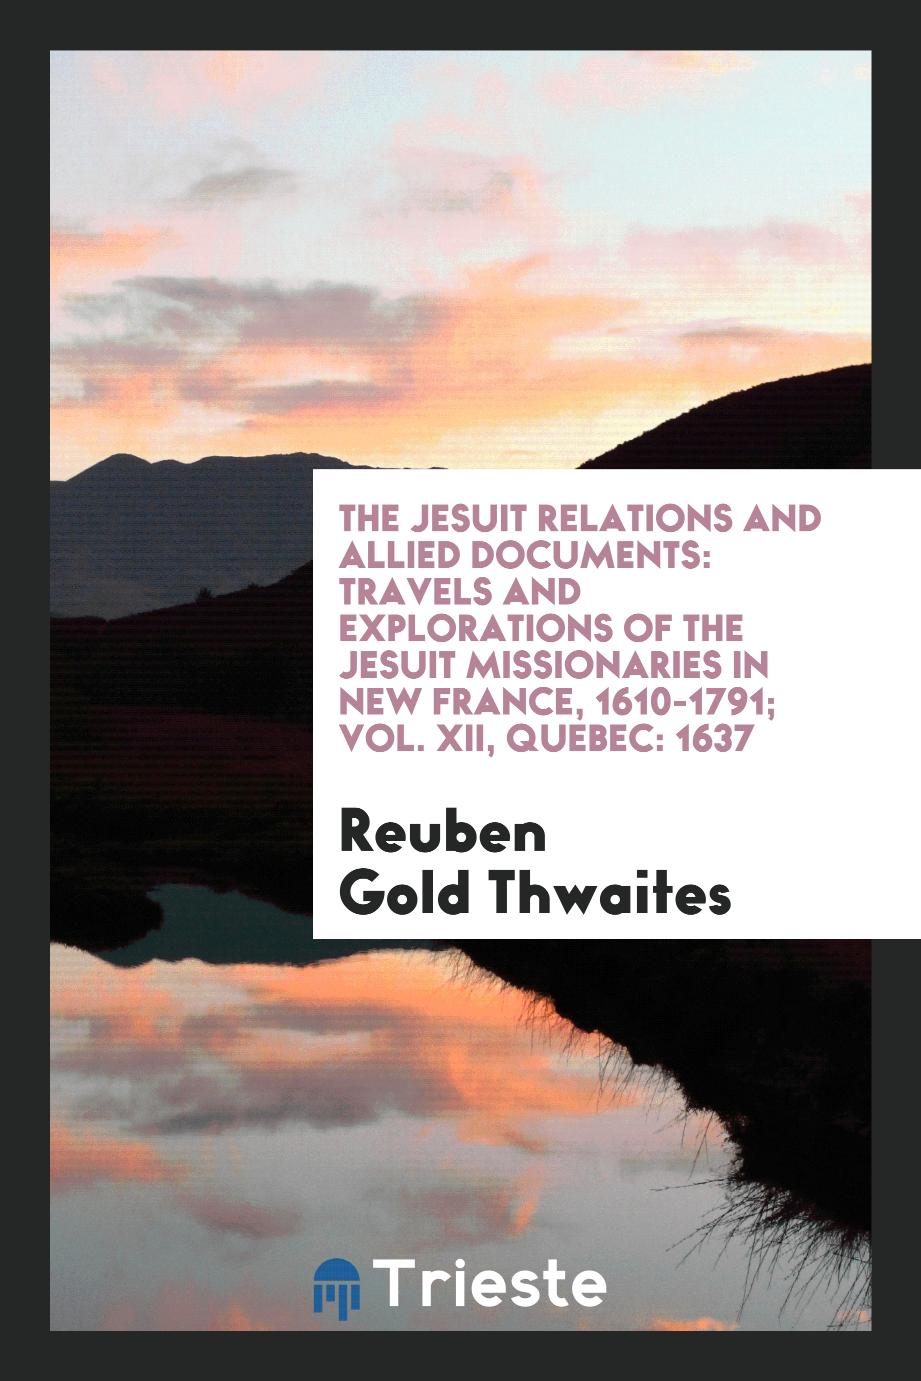 The Jesuit relations and allied documents: travels and explorations of the Jesuit missionaries in New France, 1610-1791; Vol. XII, Quebec: 1637